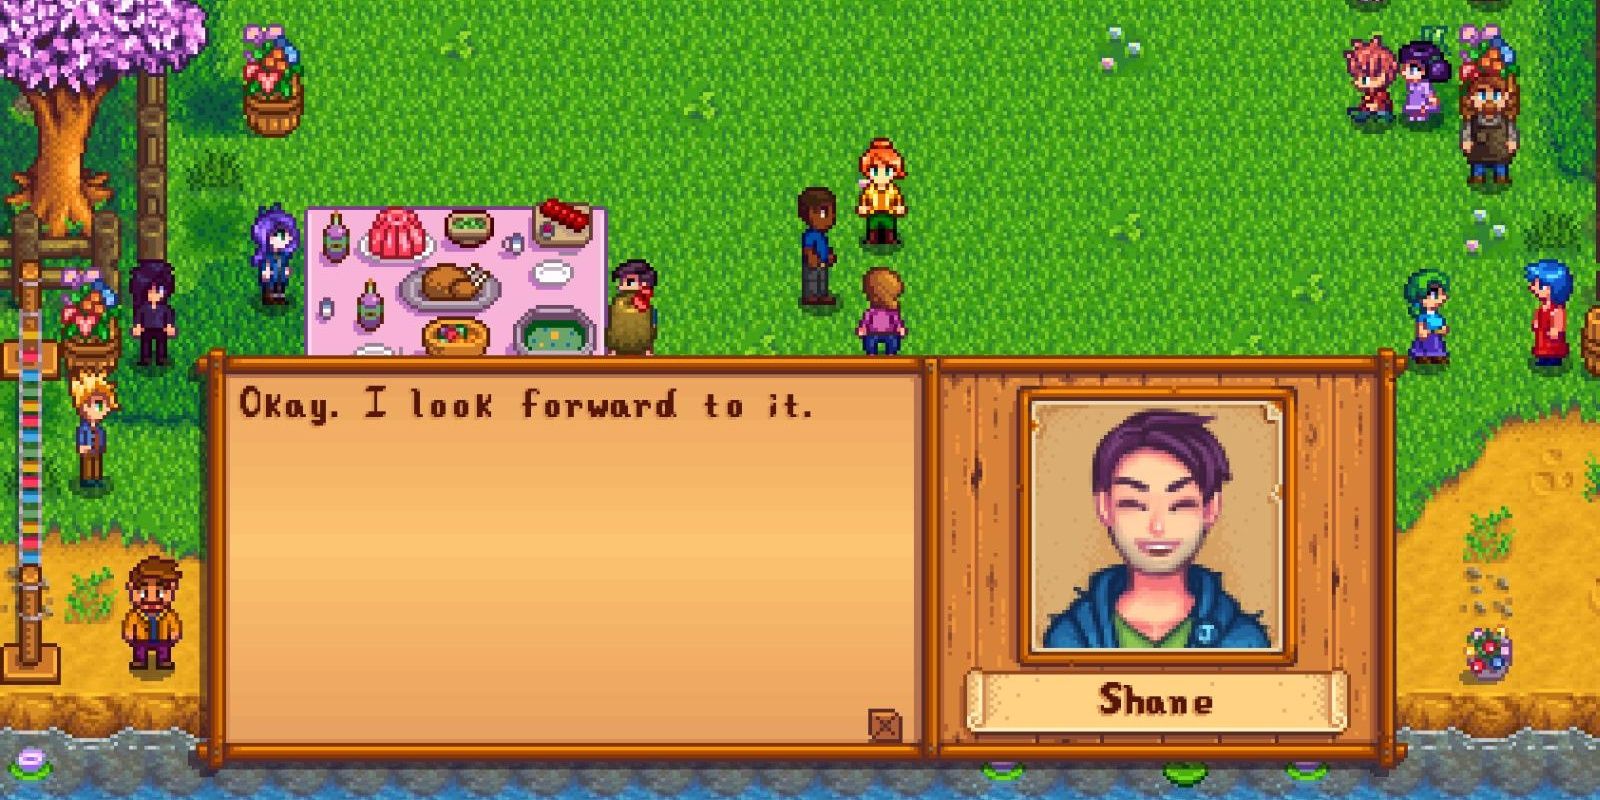 Shane agreeing to be the player's dance partner in Stardew Valley's Flower Dance